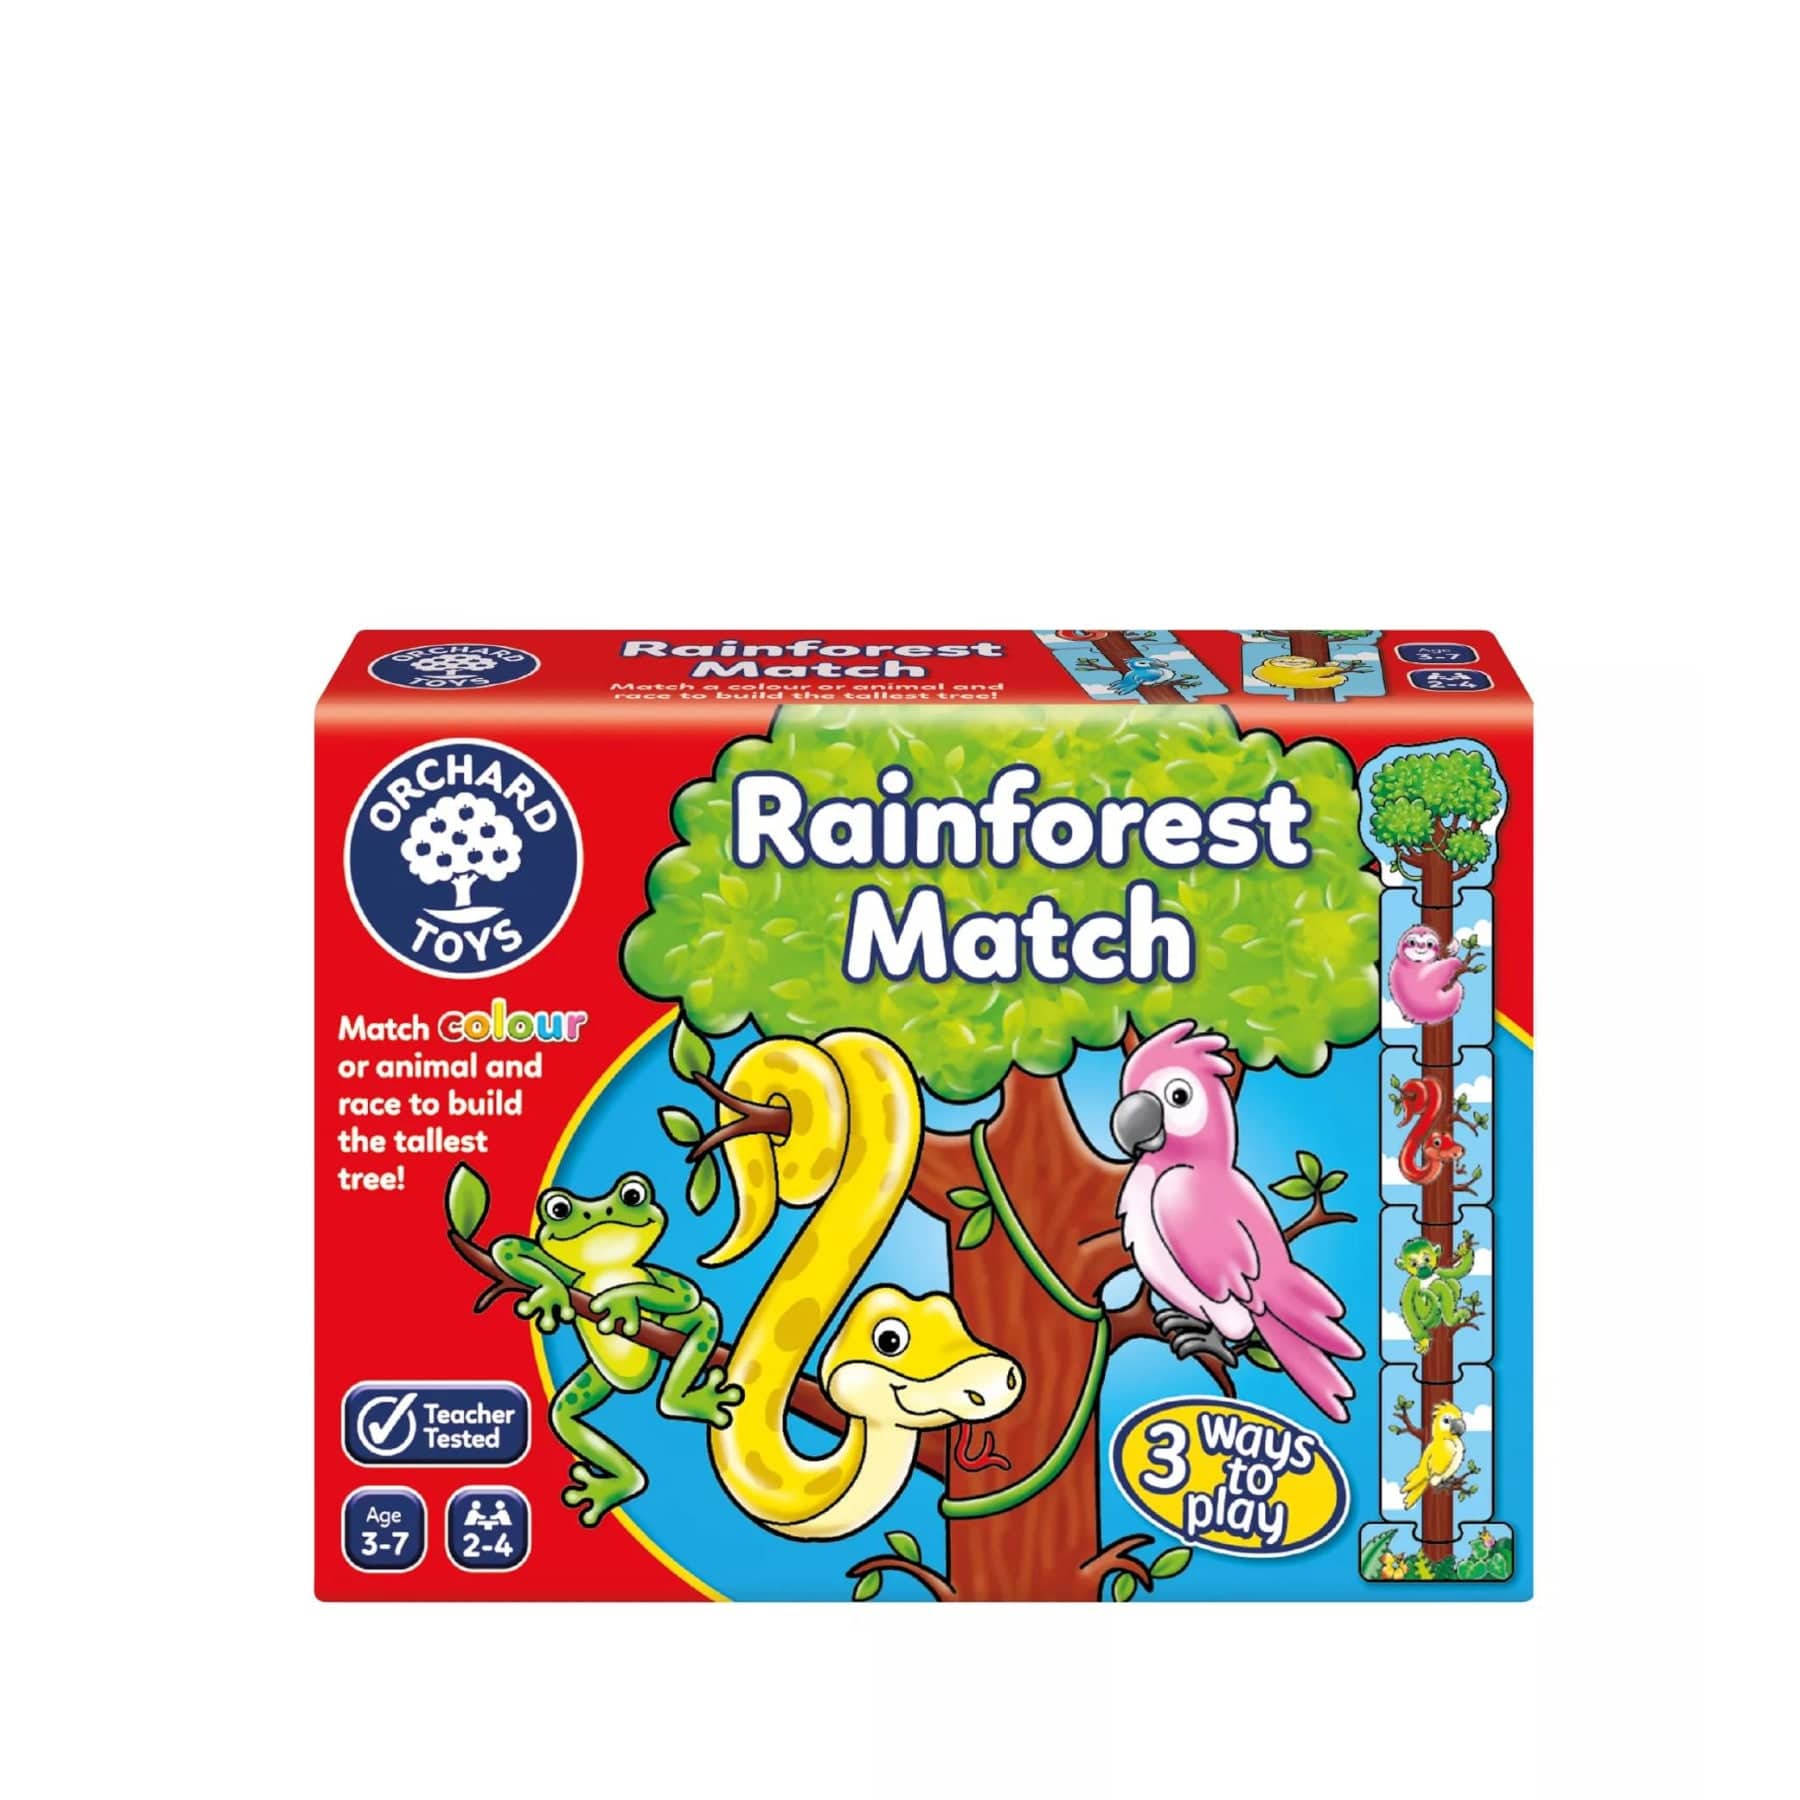 Orchard Toys Rainforest Match game box featuring colorful illustrations of a frog, snake, and parrot, educational matching and memory game for children aged 3-7, family board game with animal and color matching for kids, tabletop gaming, 3 ways to play, teacher tested.